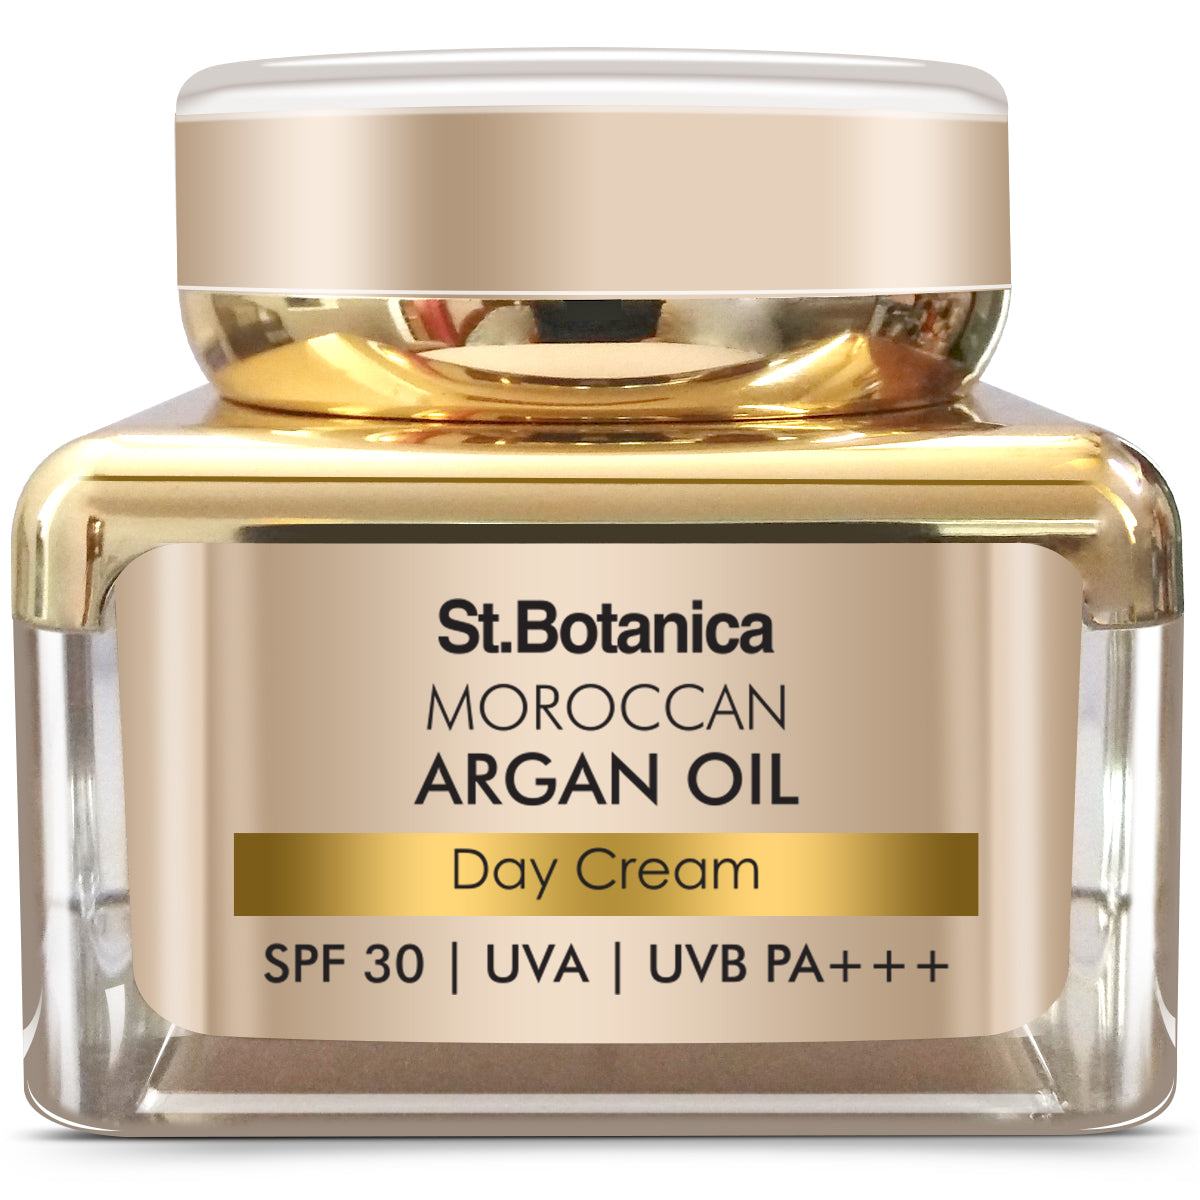 St.Botanica Moroccan Argan Oil Day Cream With SPF 30 UVA/UVB PA+++, Daily Cream For a Glowing, Youthful Looking Complexion, 50 g (STBOT555)